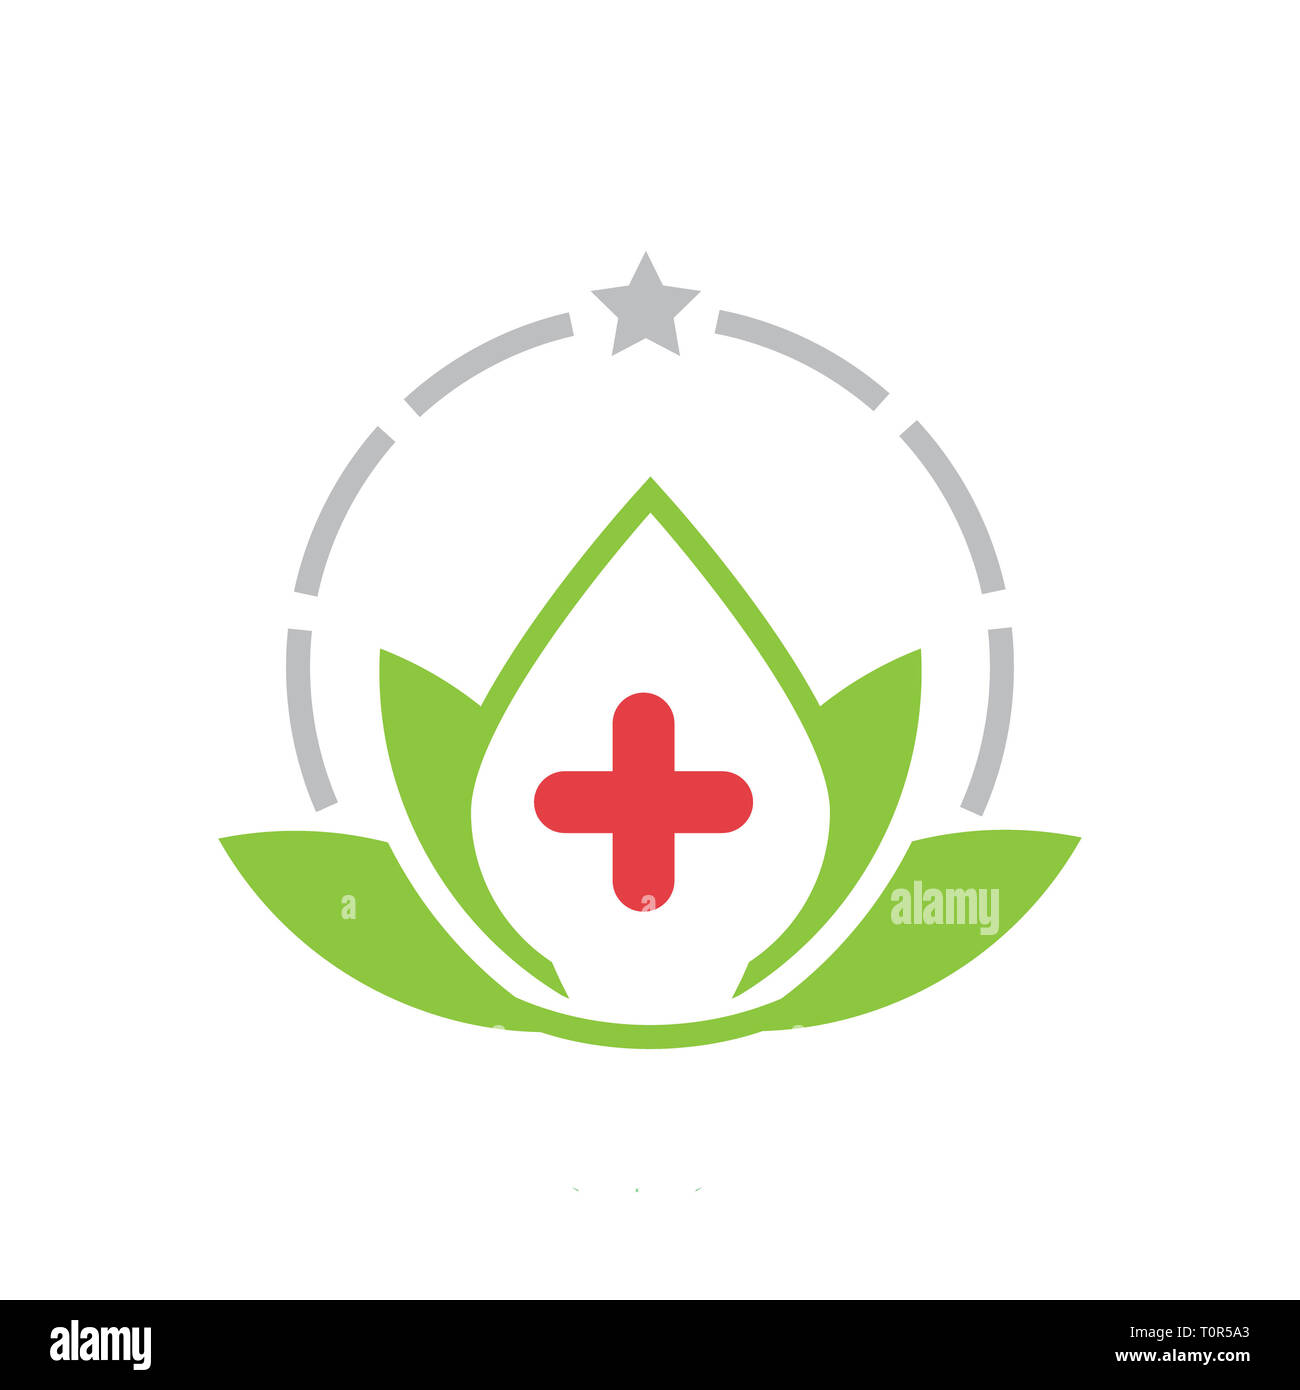 Vector Illustration Physiotherapy Logo Design With Leaf And Star